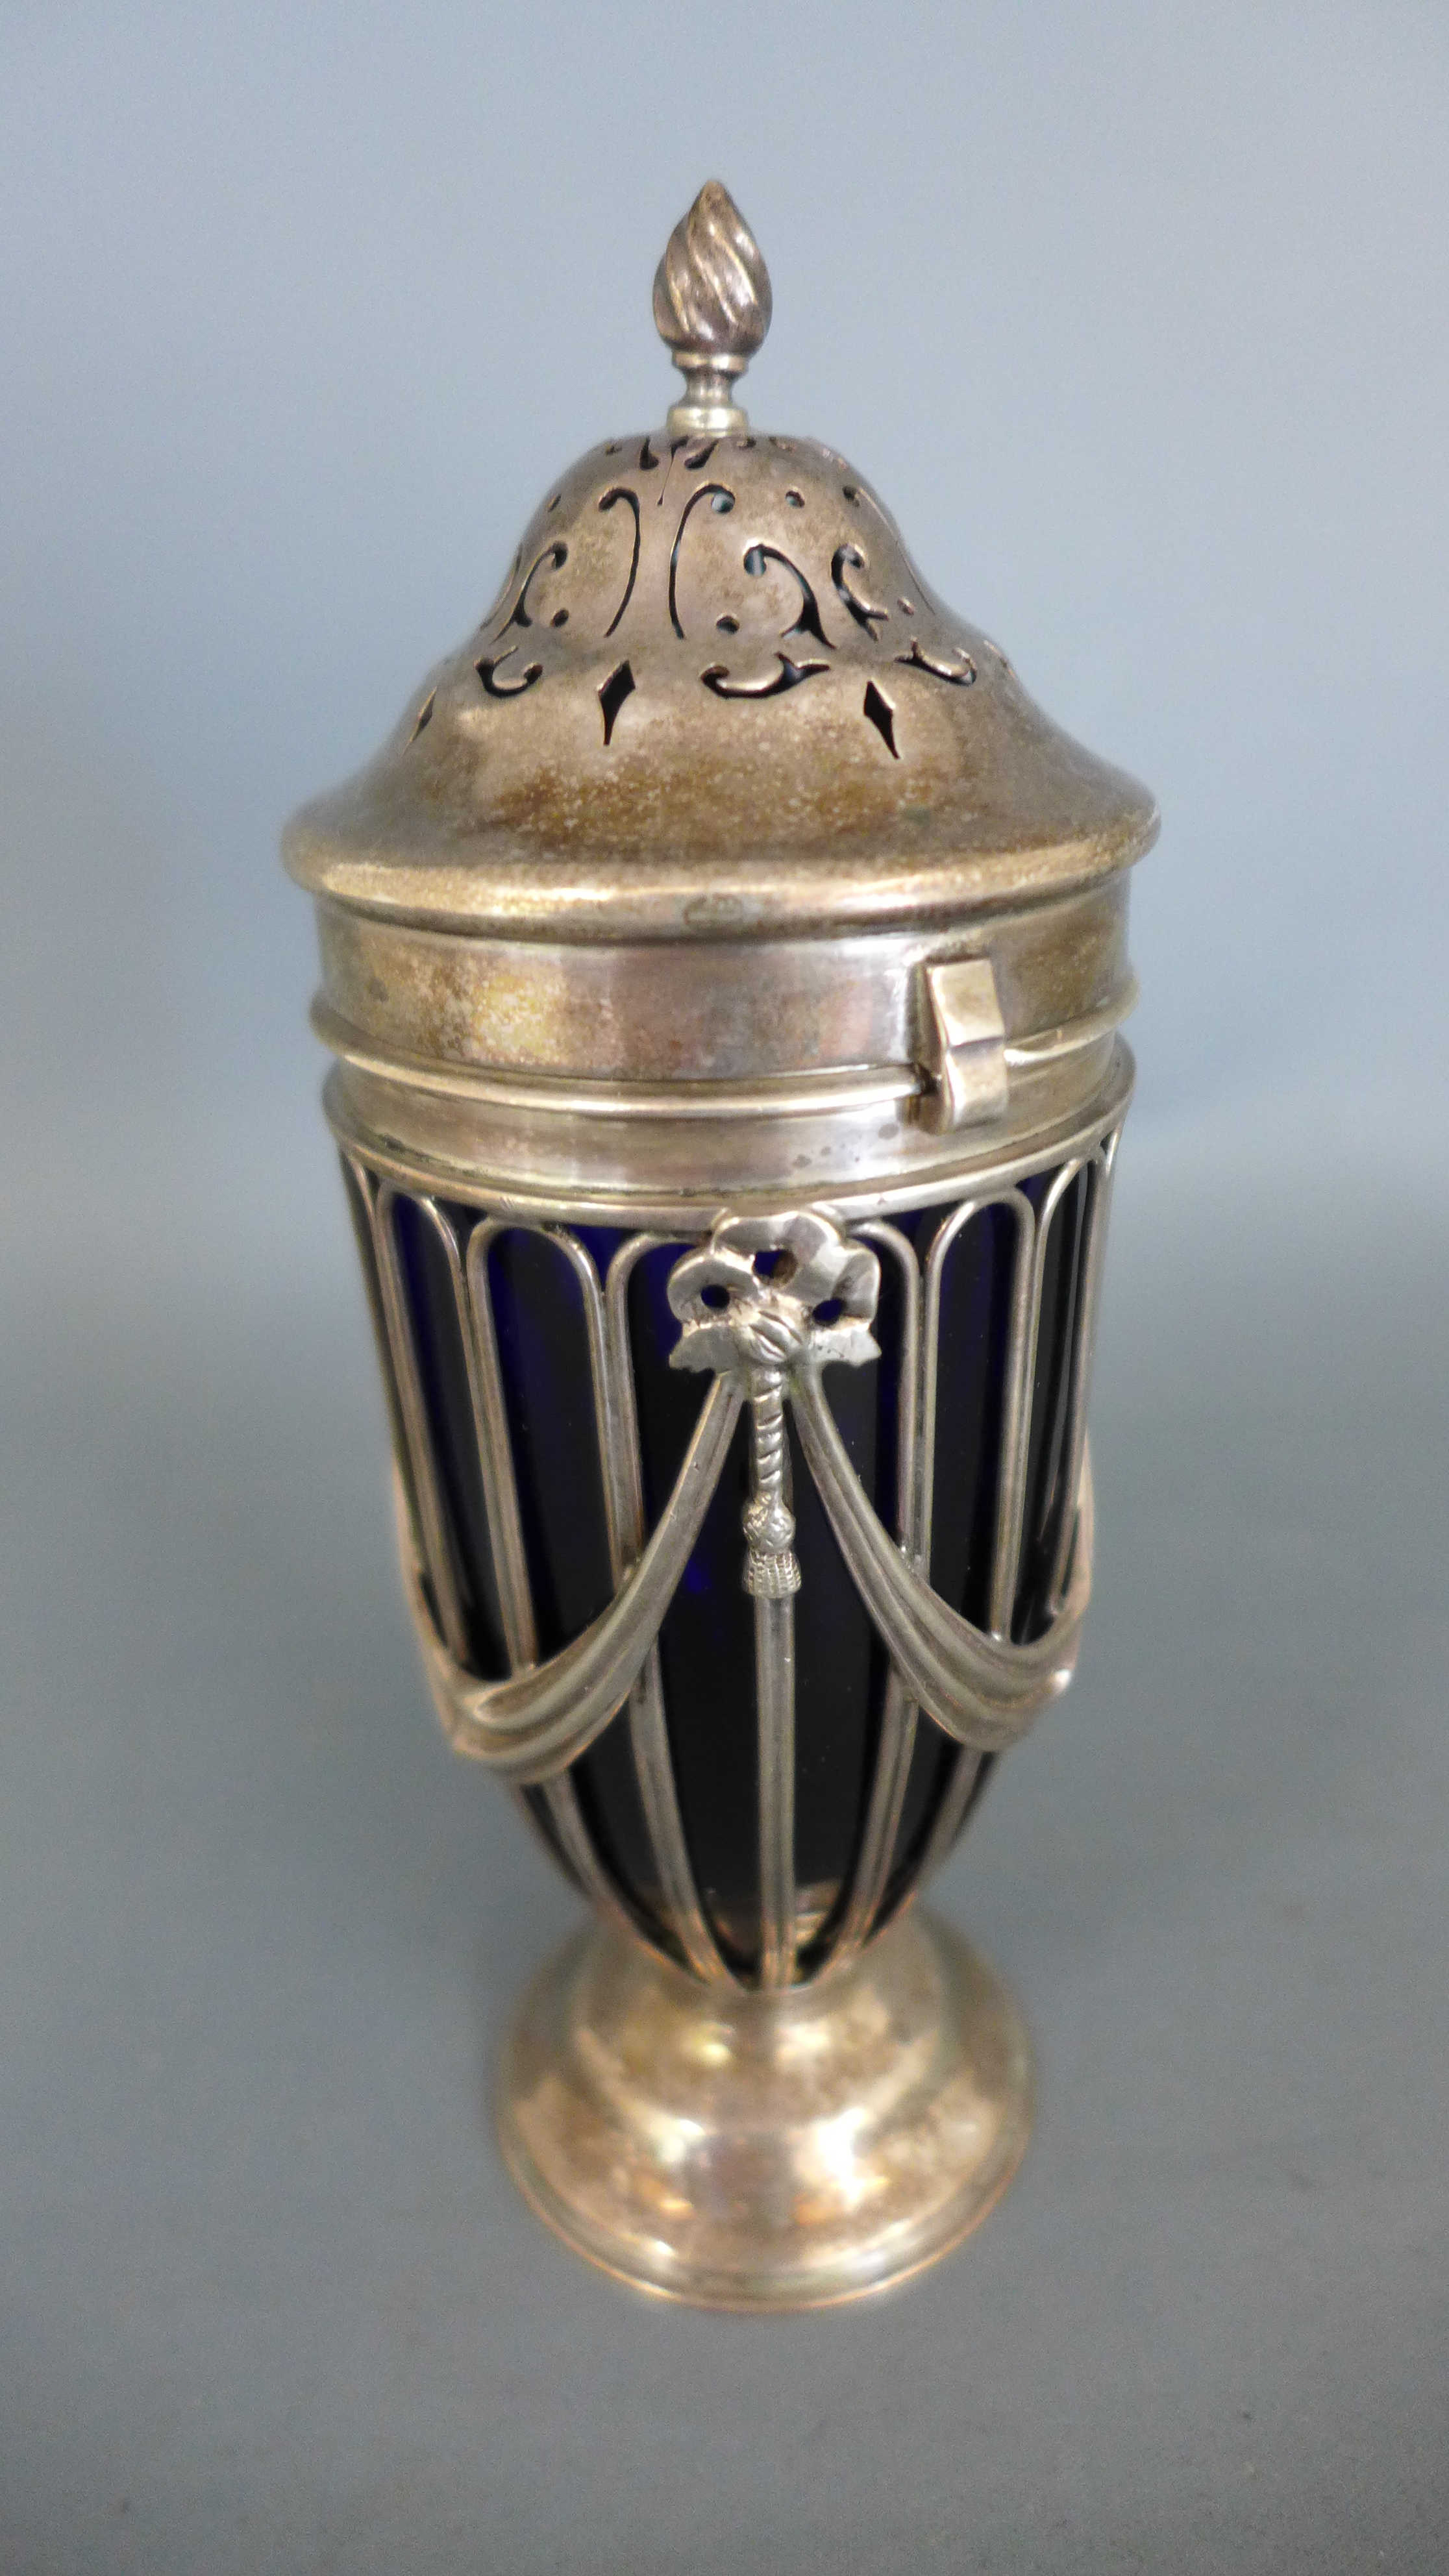 A silver caster with a blue glass liner - Chester 1901/02 E J H N H - Height 15cm Condition